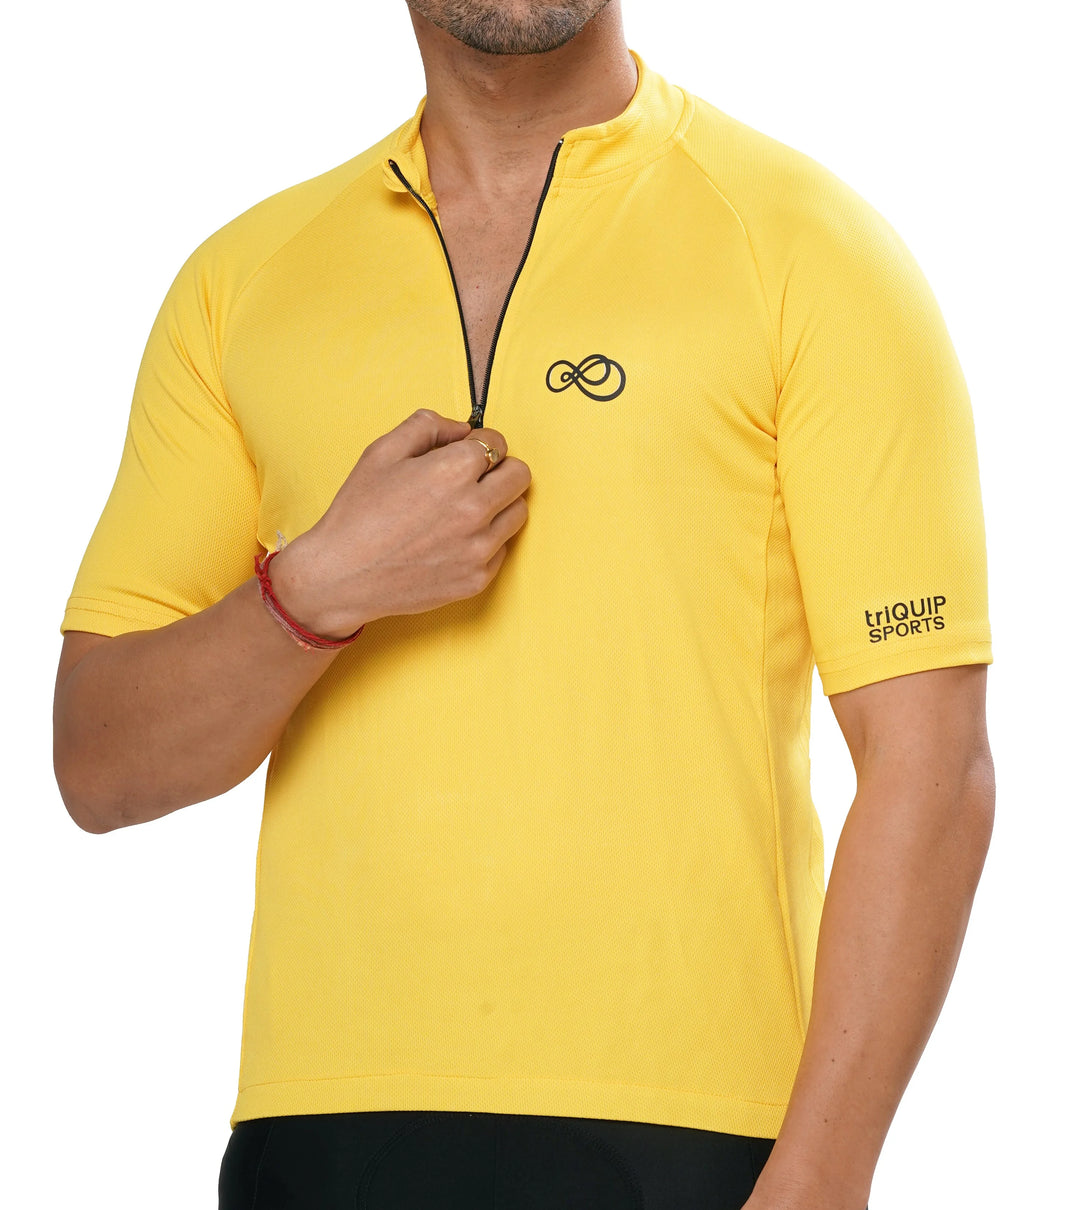 triQUIP Basic Cycling Jersey